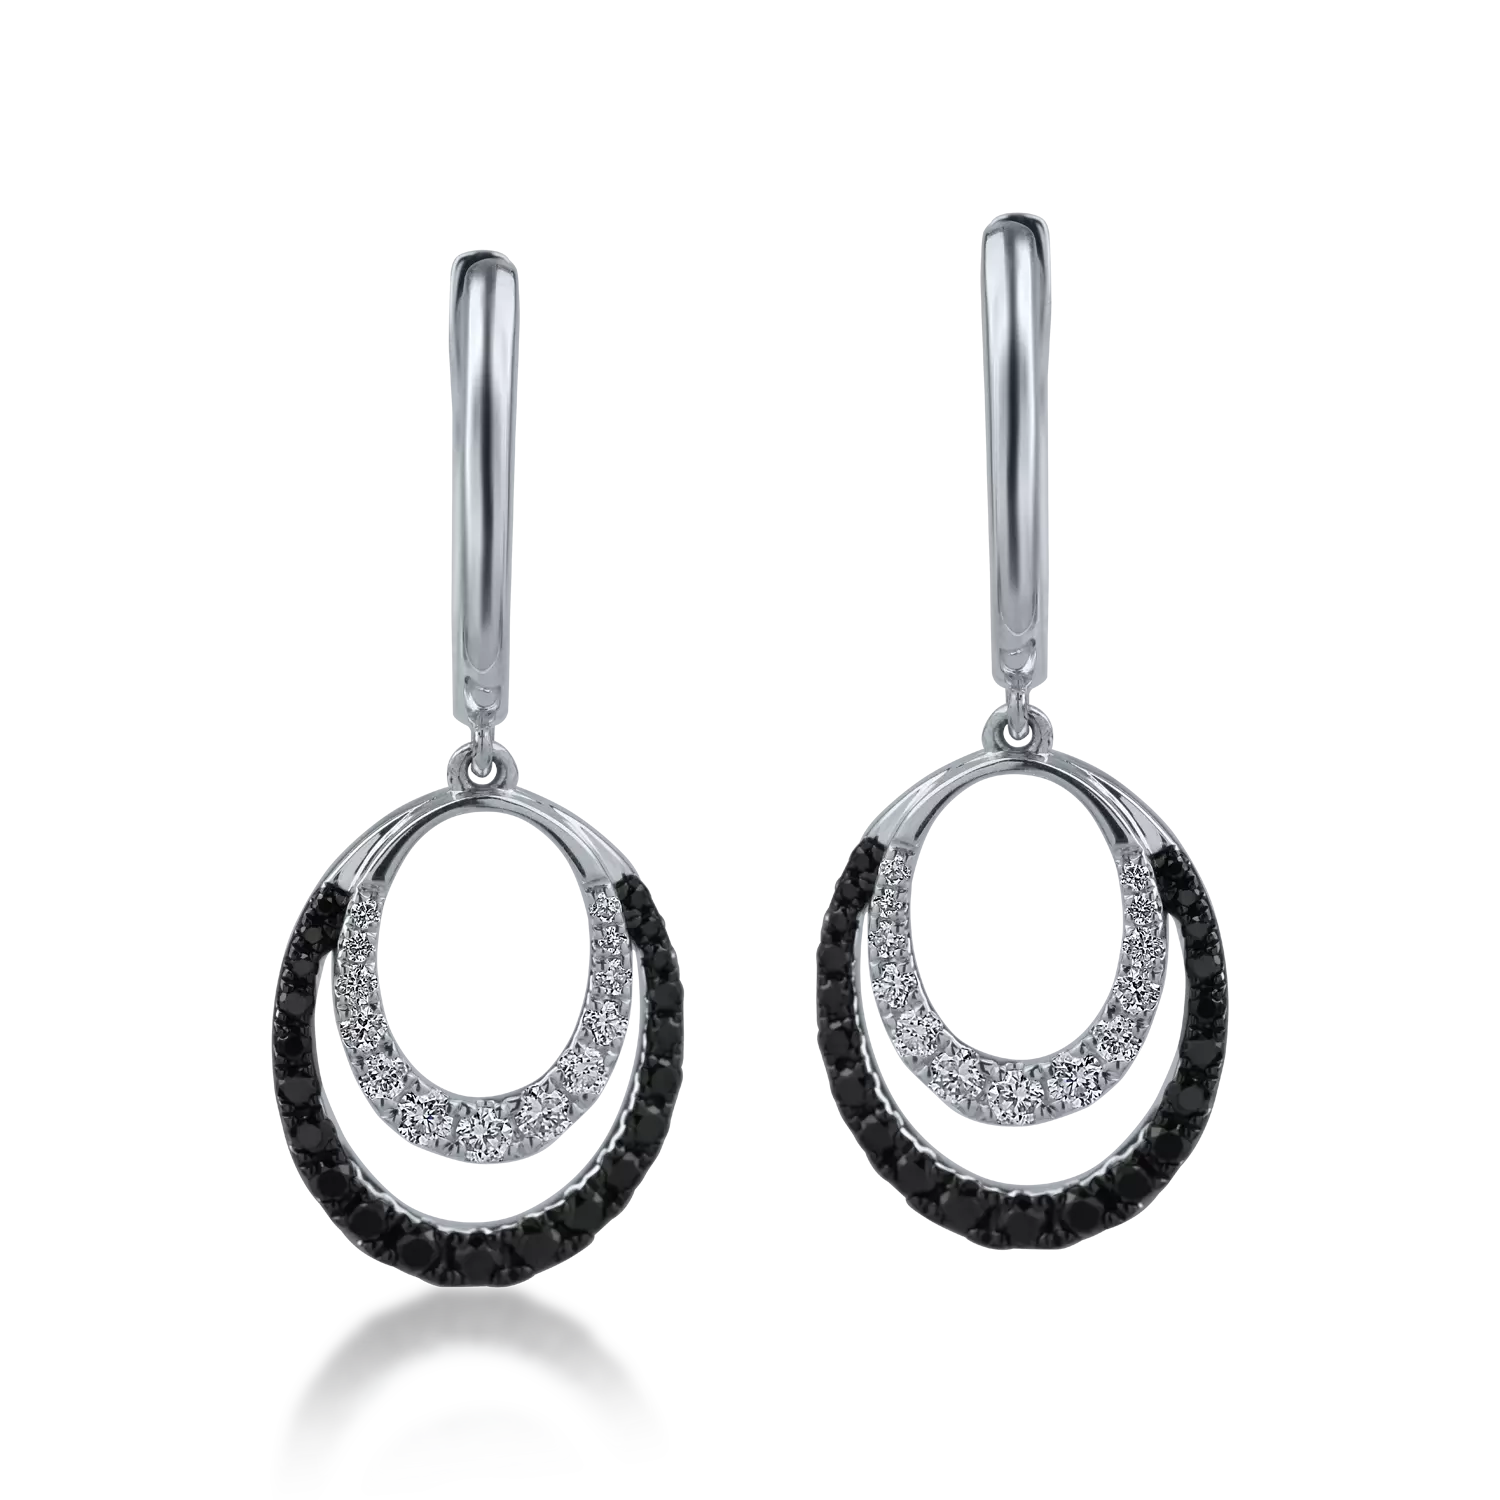 White gold earrings with 0.16ct clear diamonds and 0.25ct black diamonds